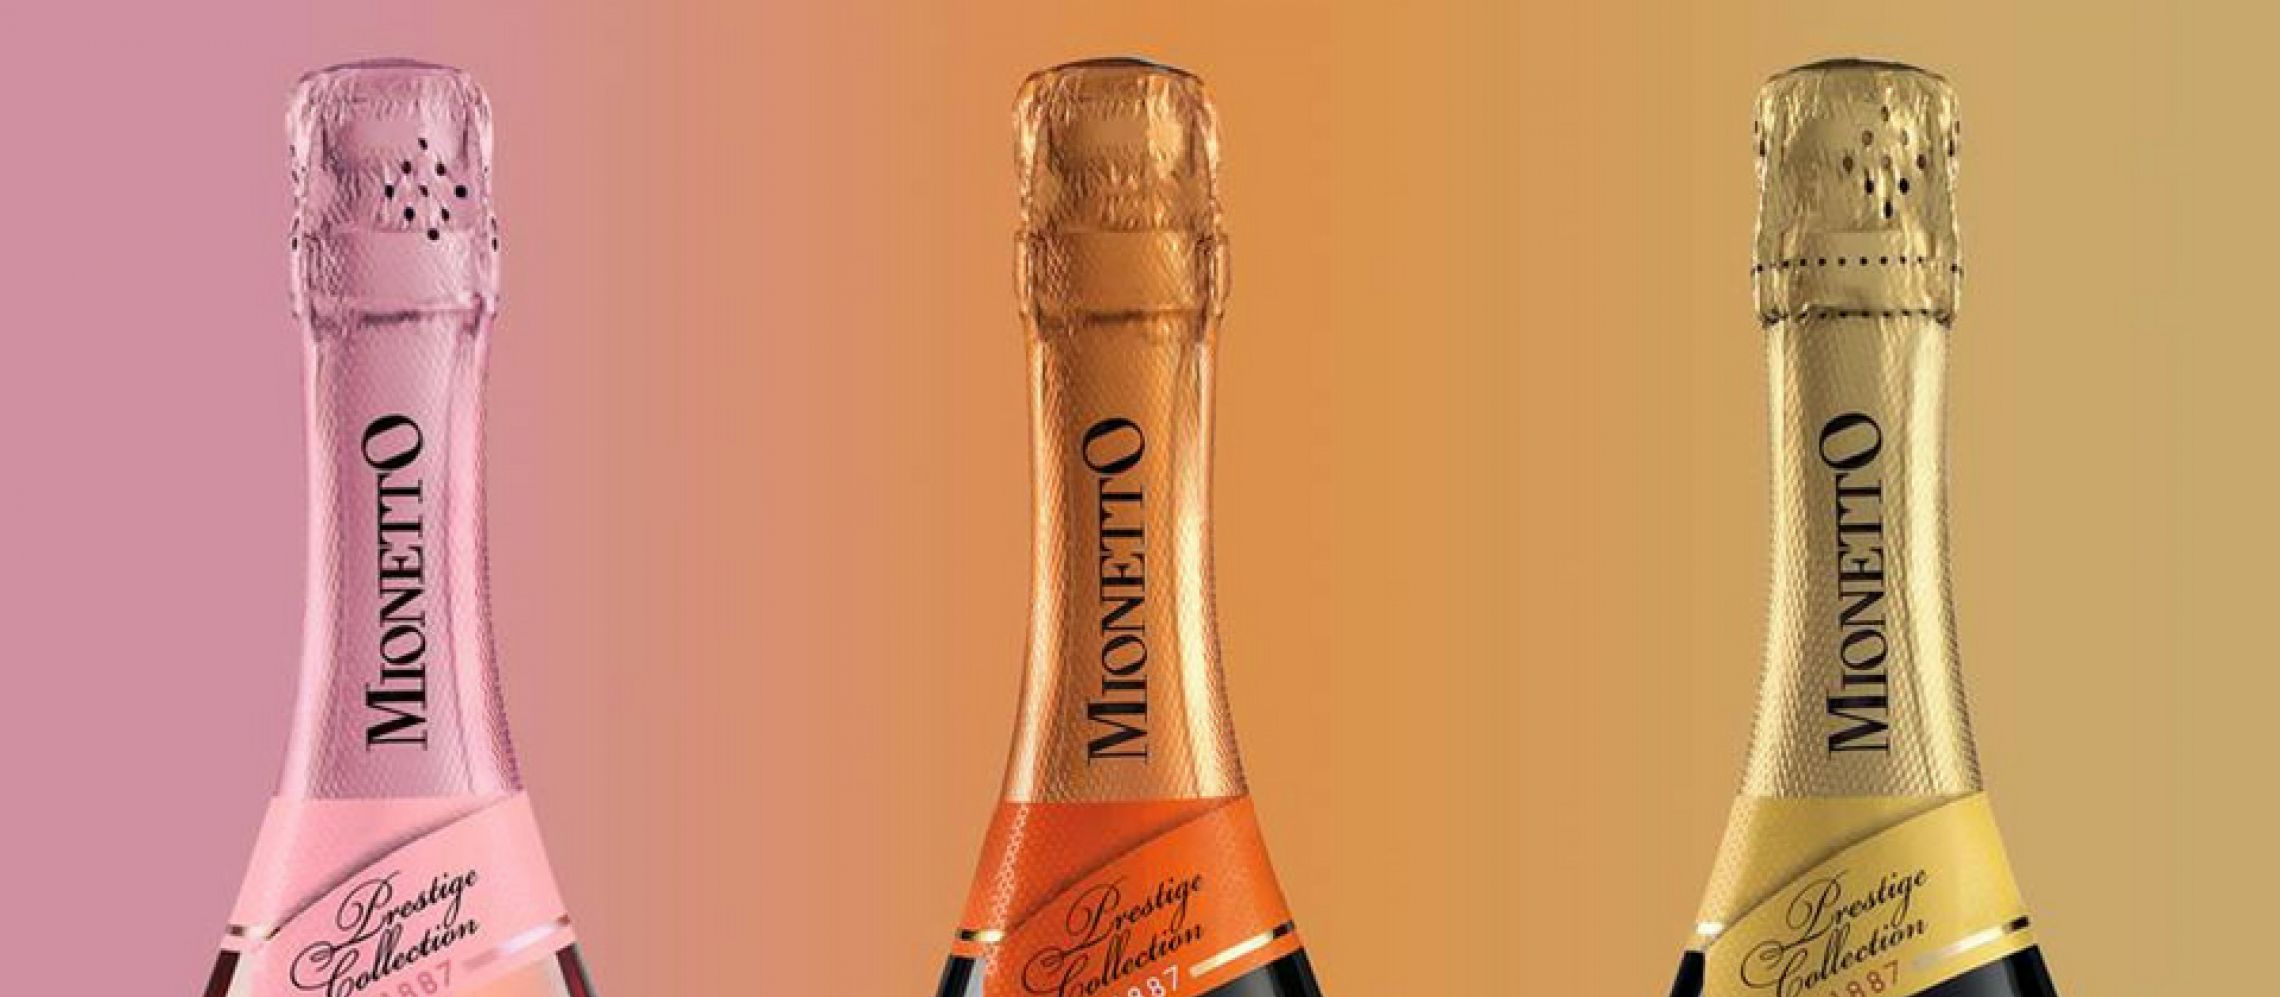 Photo for: Mionetto Prosecco: A Longtime Story Of Love From Italy